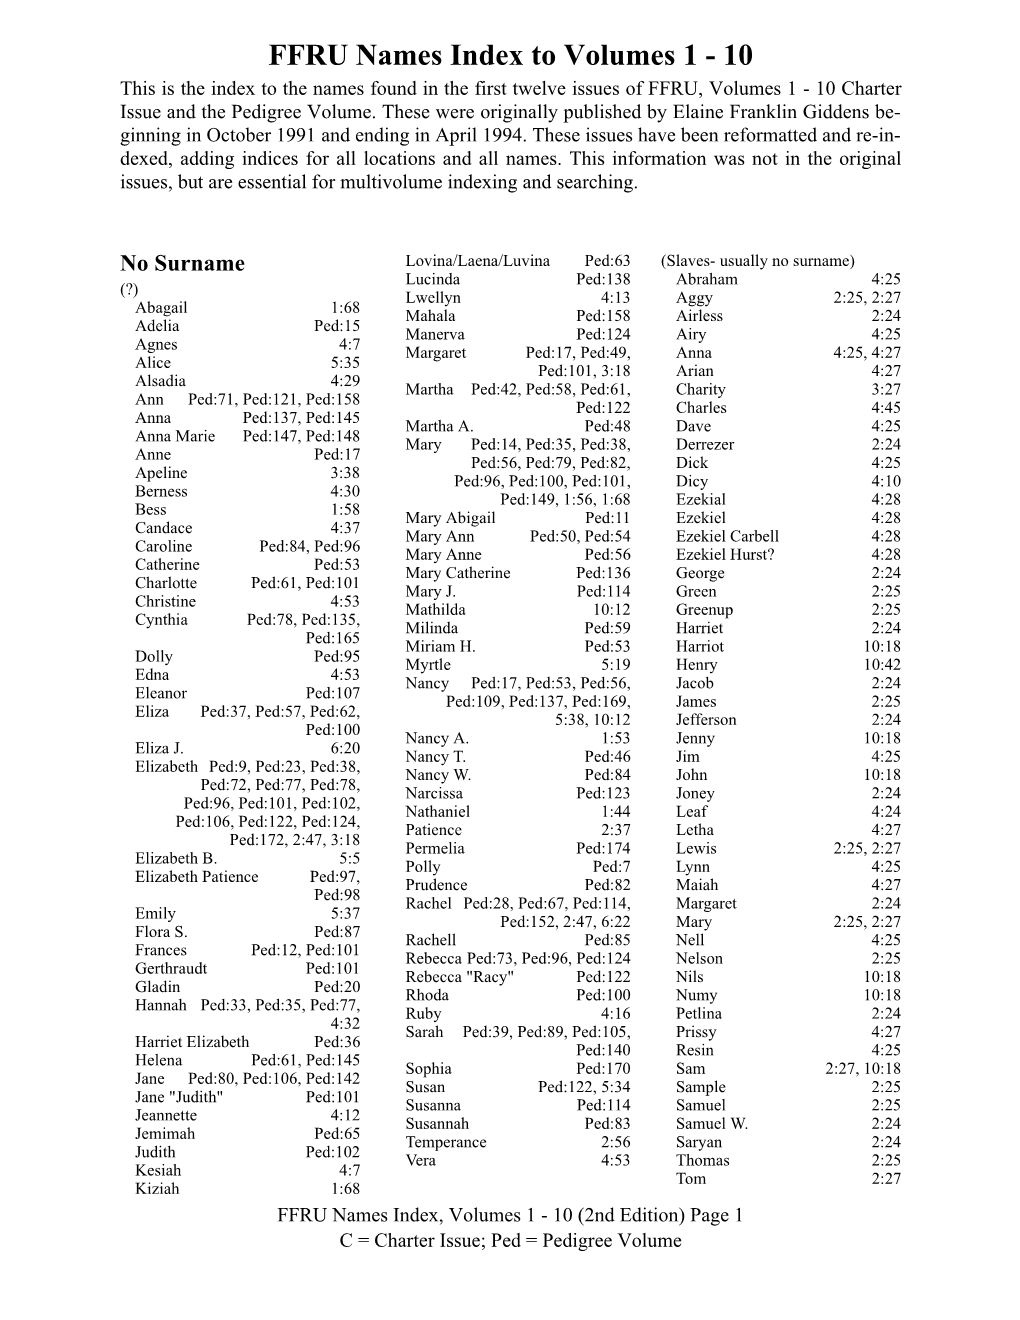 FFRU Names Index to Volumes 1 - 10 This Is the Index to the Names Found in the First Twelve Issues of FFRU, Volumes 1 - 10 Charter Issue and the Pedigree Volume